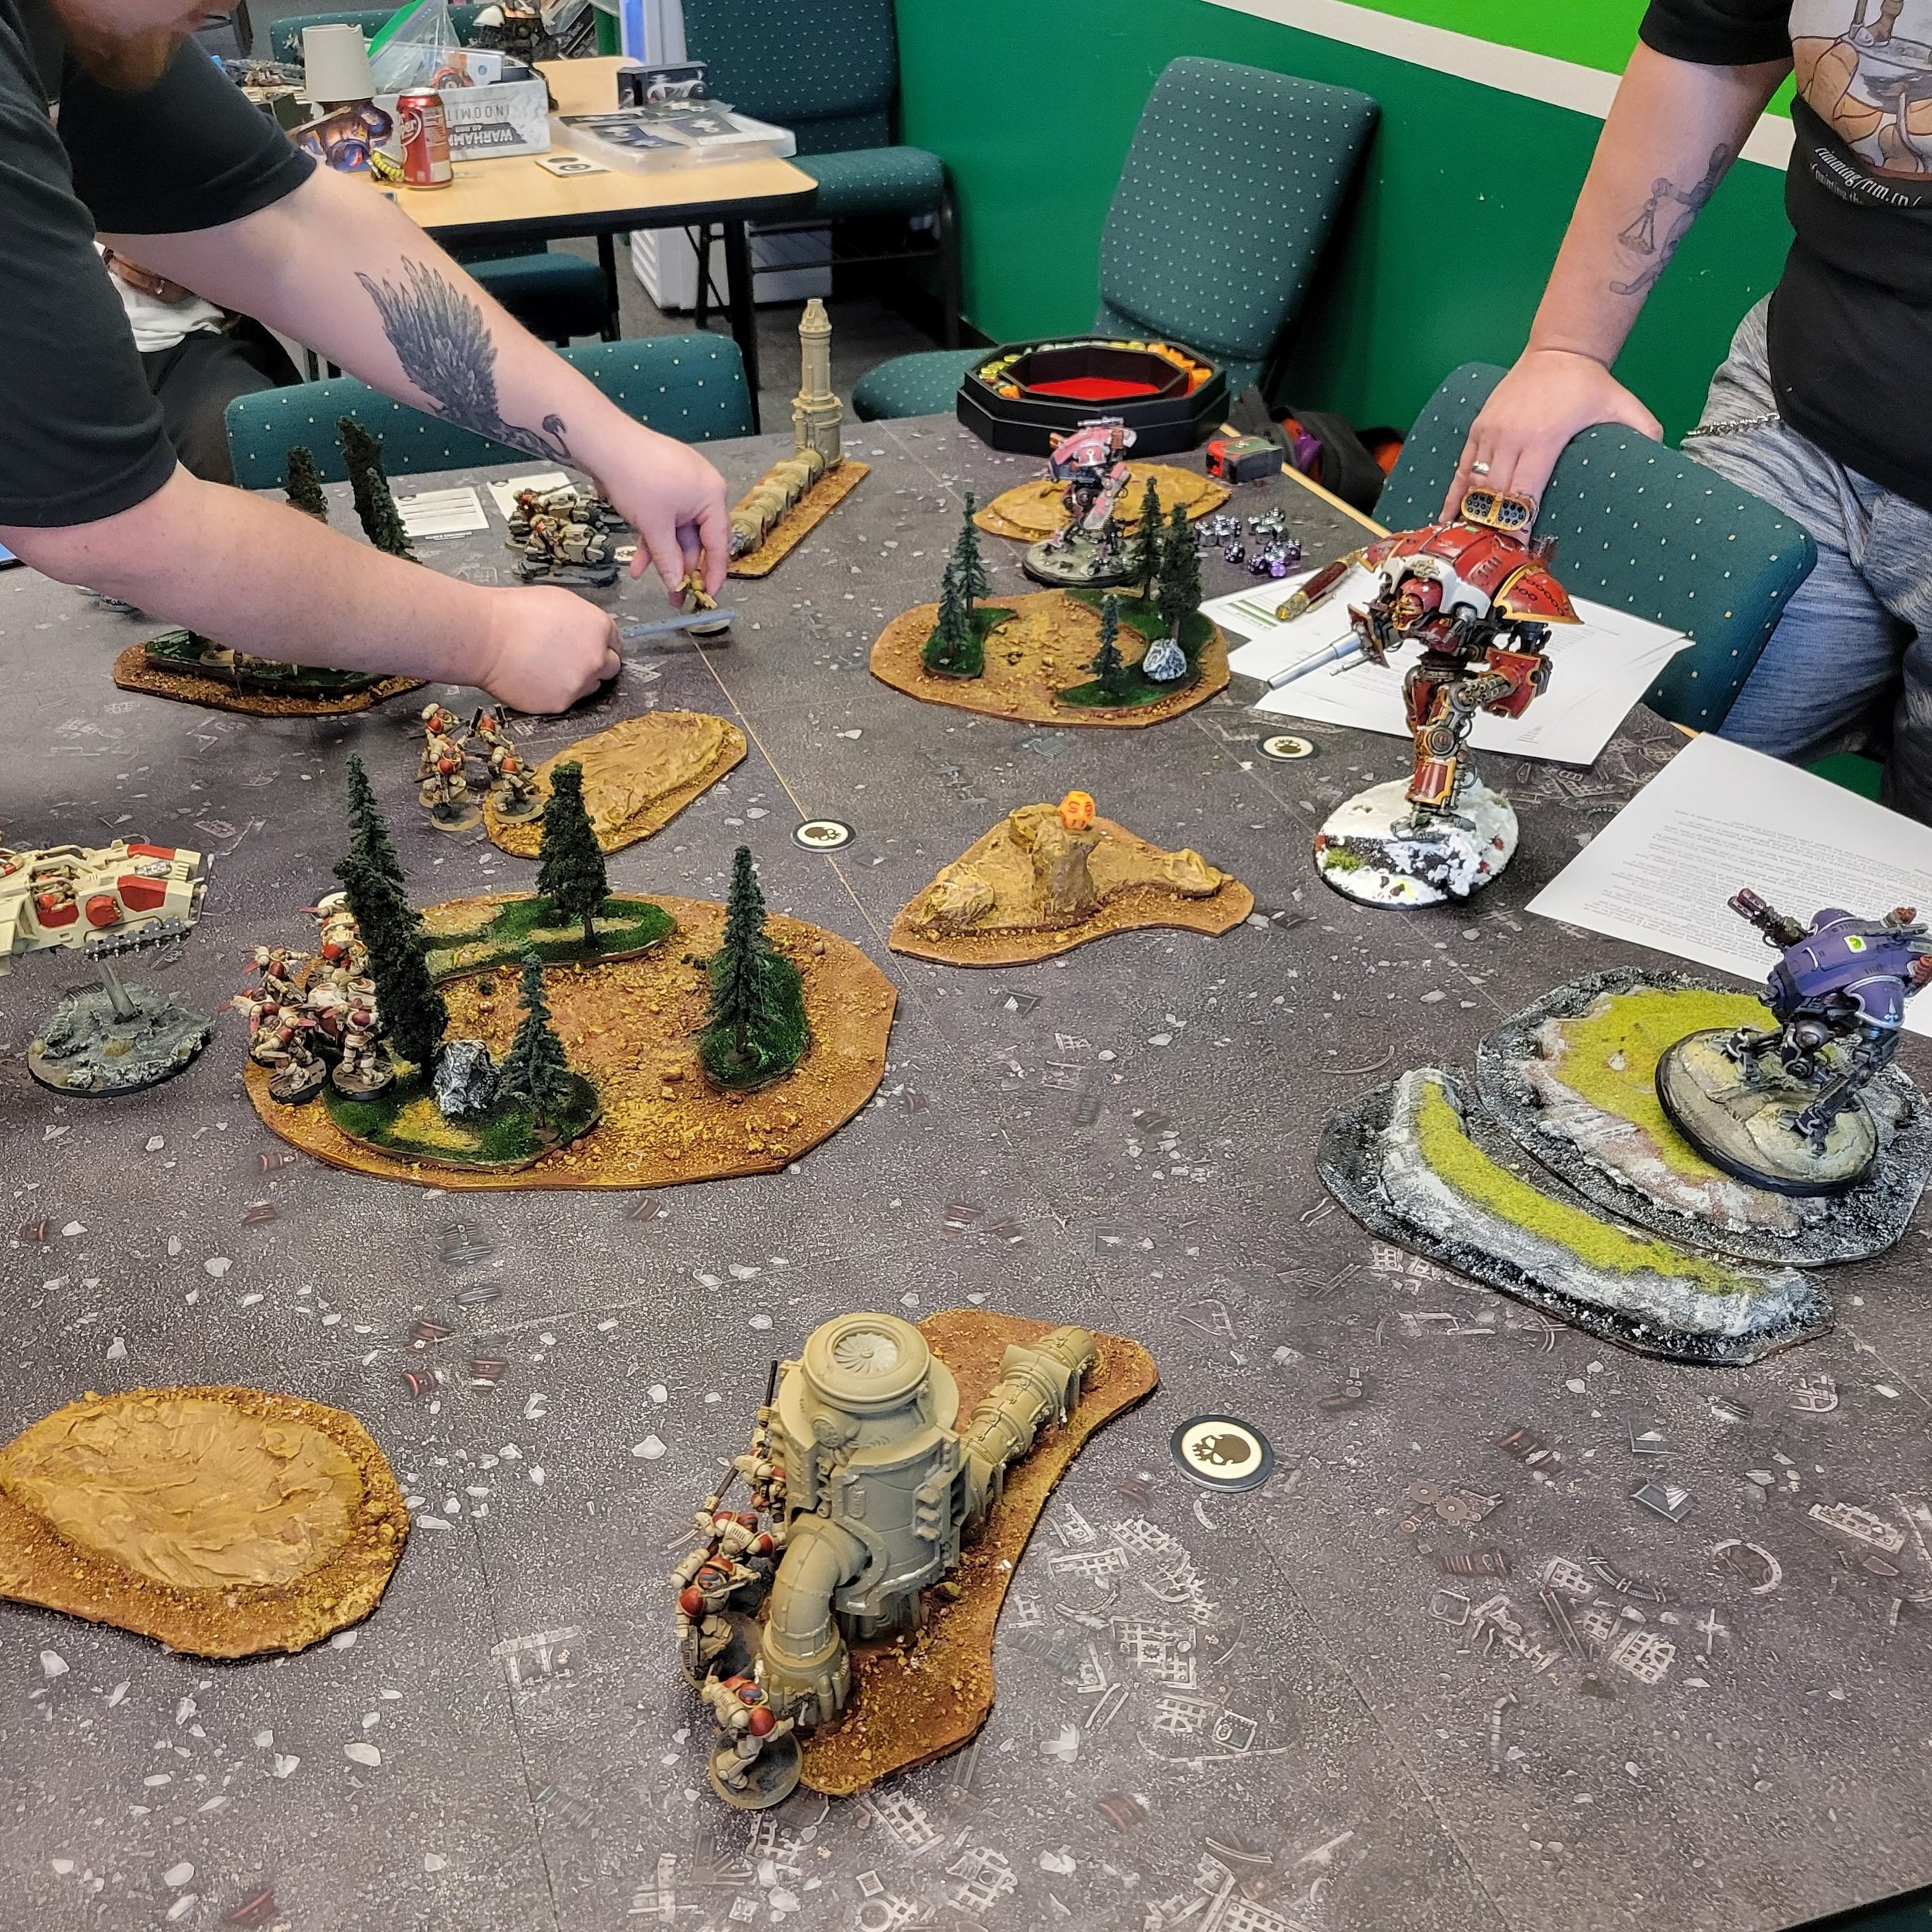 Warhammer Wednesday commences at 1300 hours. (That&rsquo;s 1pm for the rest of us) Bring your painting supplies or reserve a table for our Escalation League to get your game in for Phase 1, Round 1. There&rsquo;s still time for new players to join in